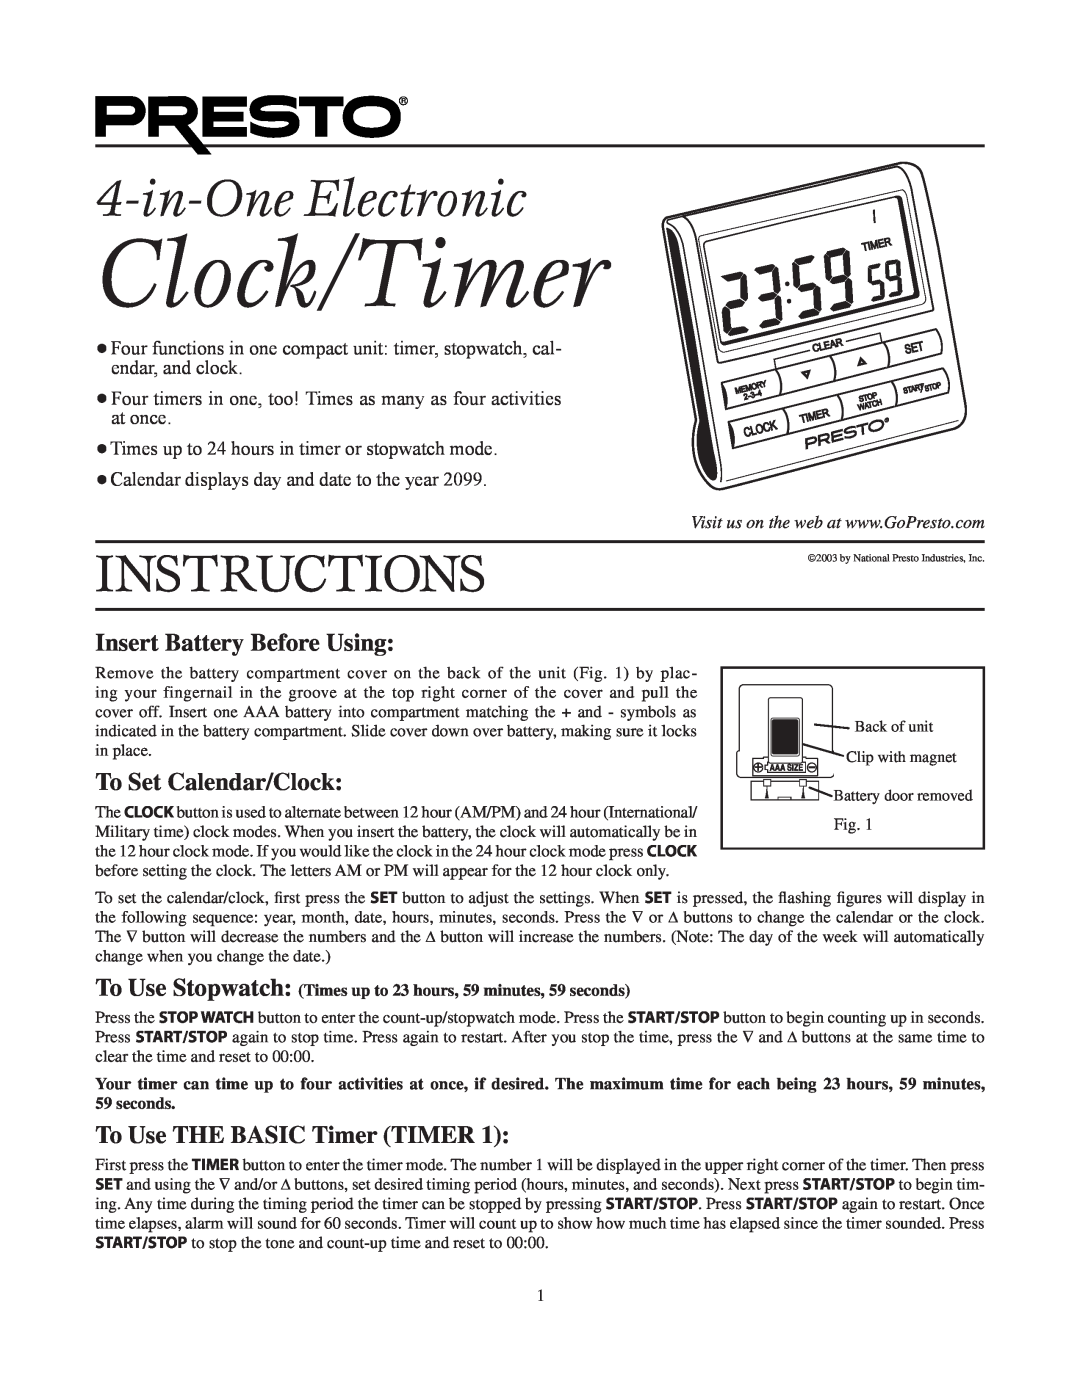 Presto manual Insert Battery Before Using, To Set Calendar/Clock, To Use THE BASIC Timer TIMER, Clock/Timer 